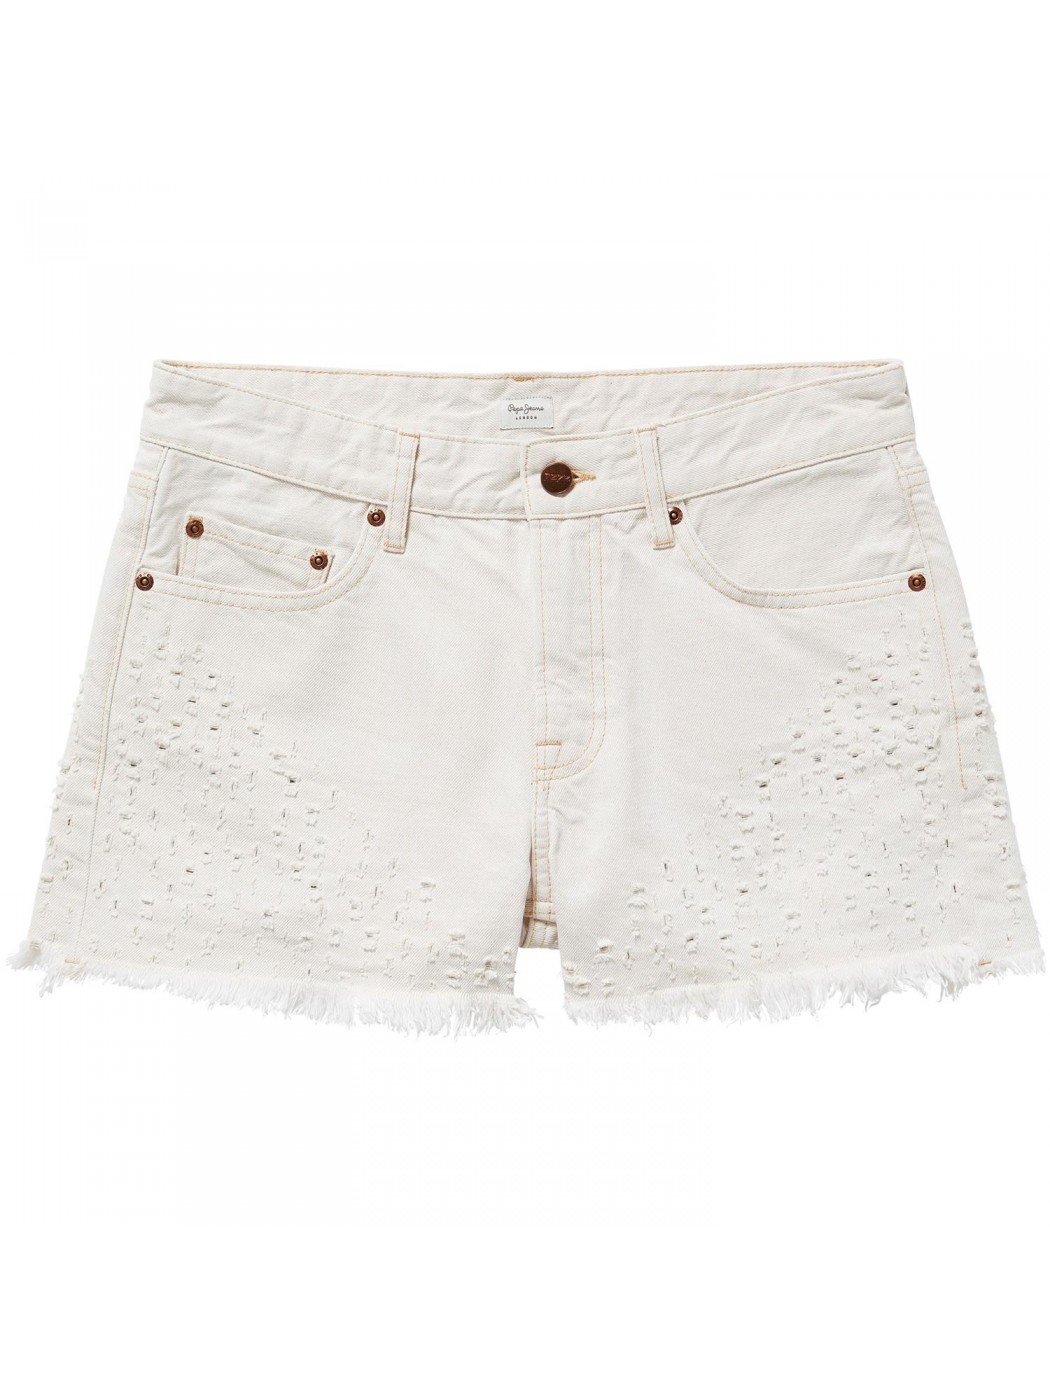 SHORT PEPE JEANS MABLE LAZER